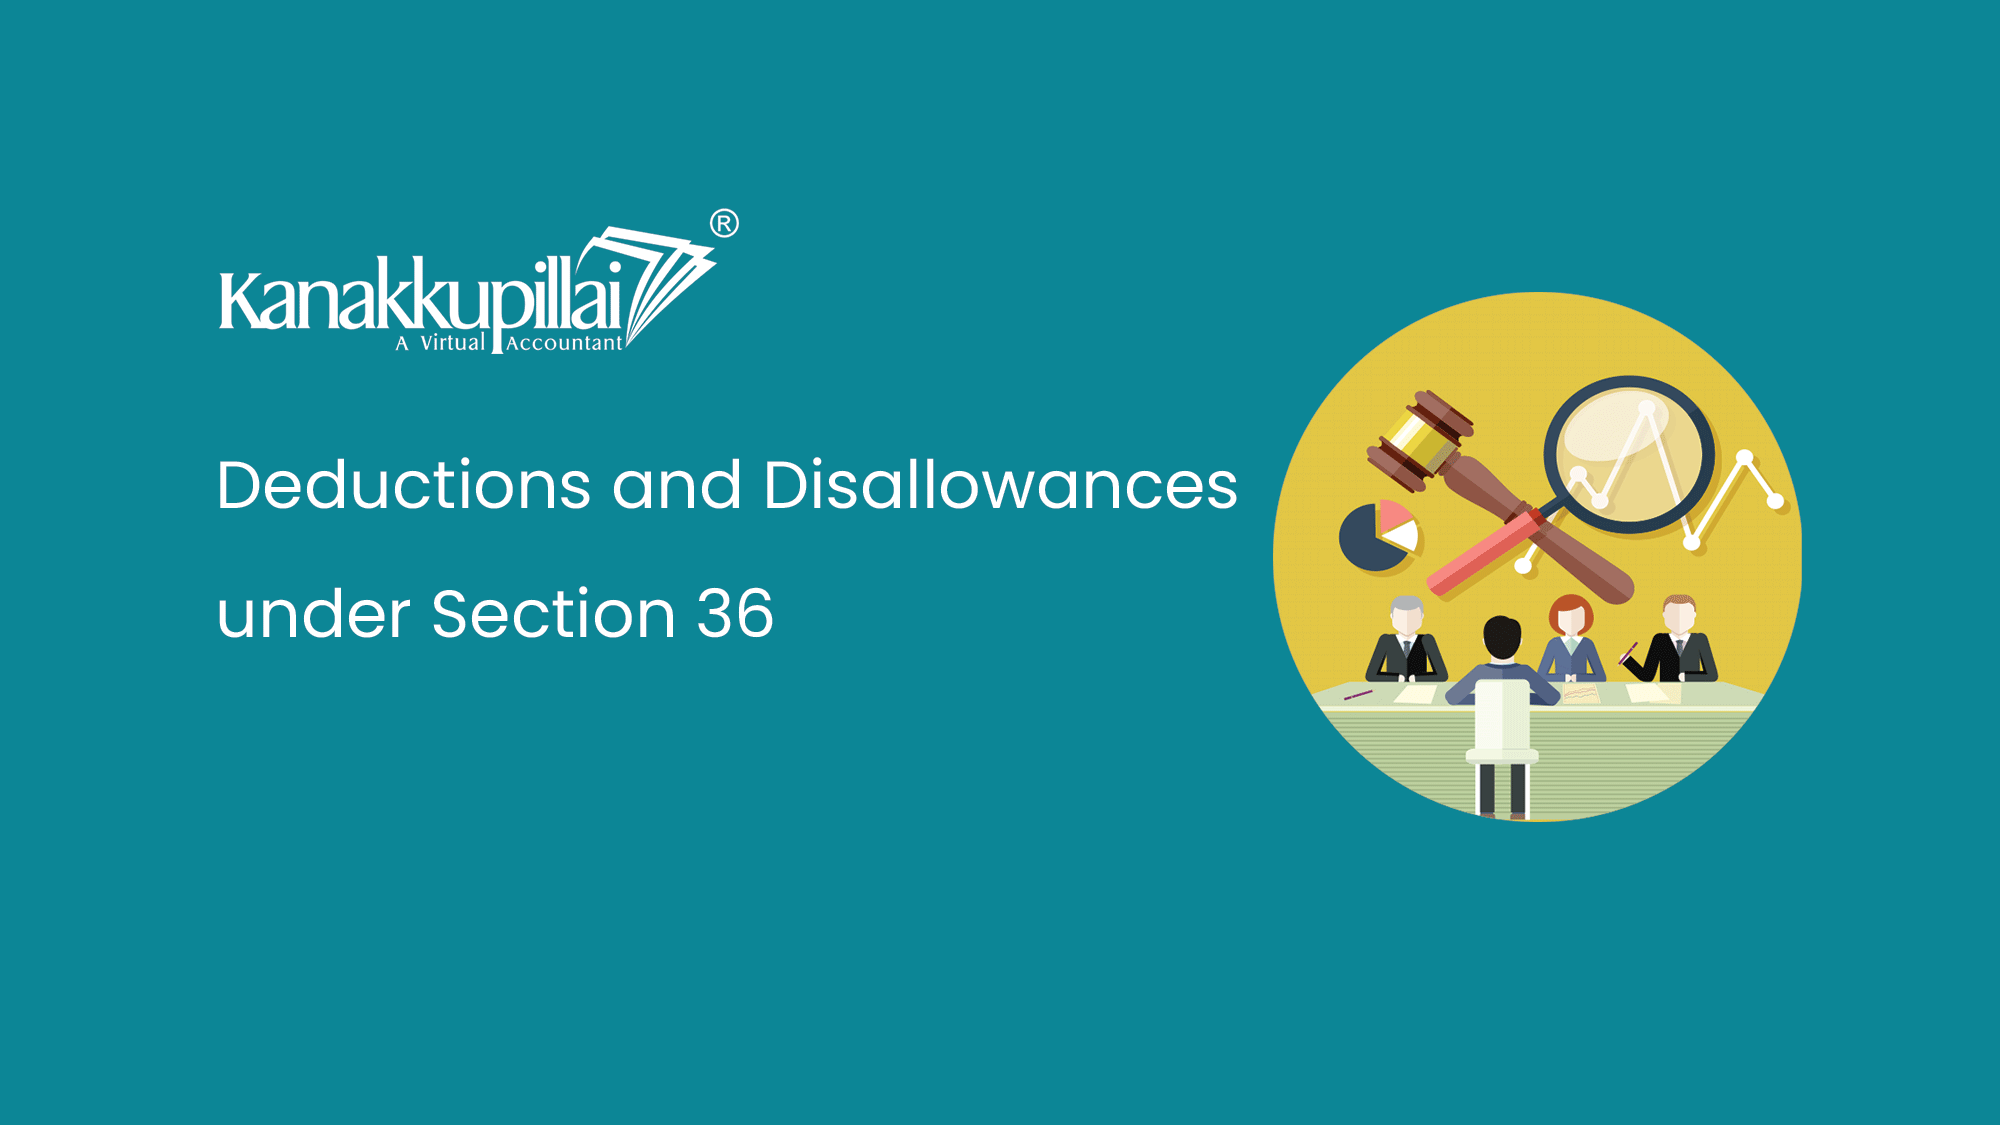 Deductions and Disallowances under Section 36